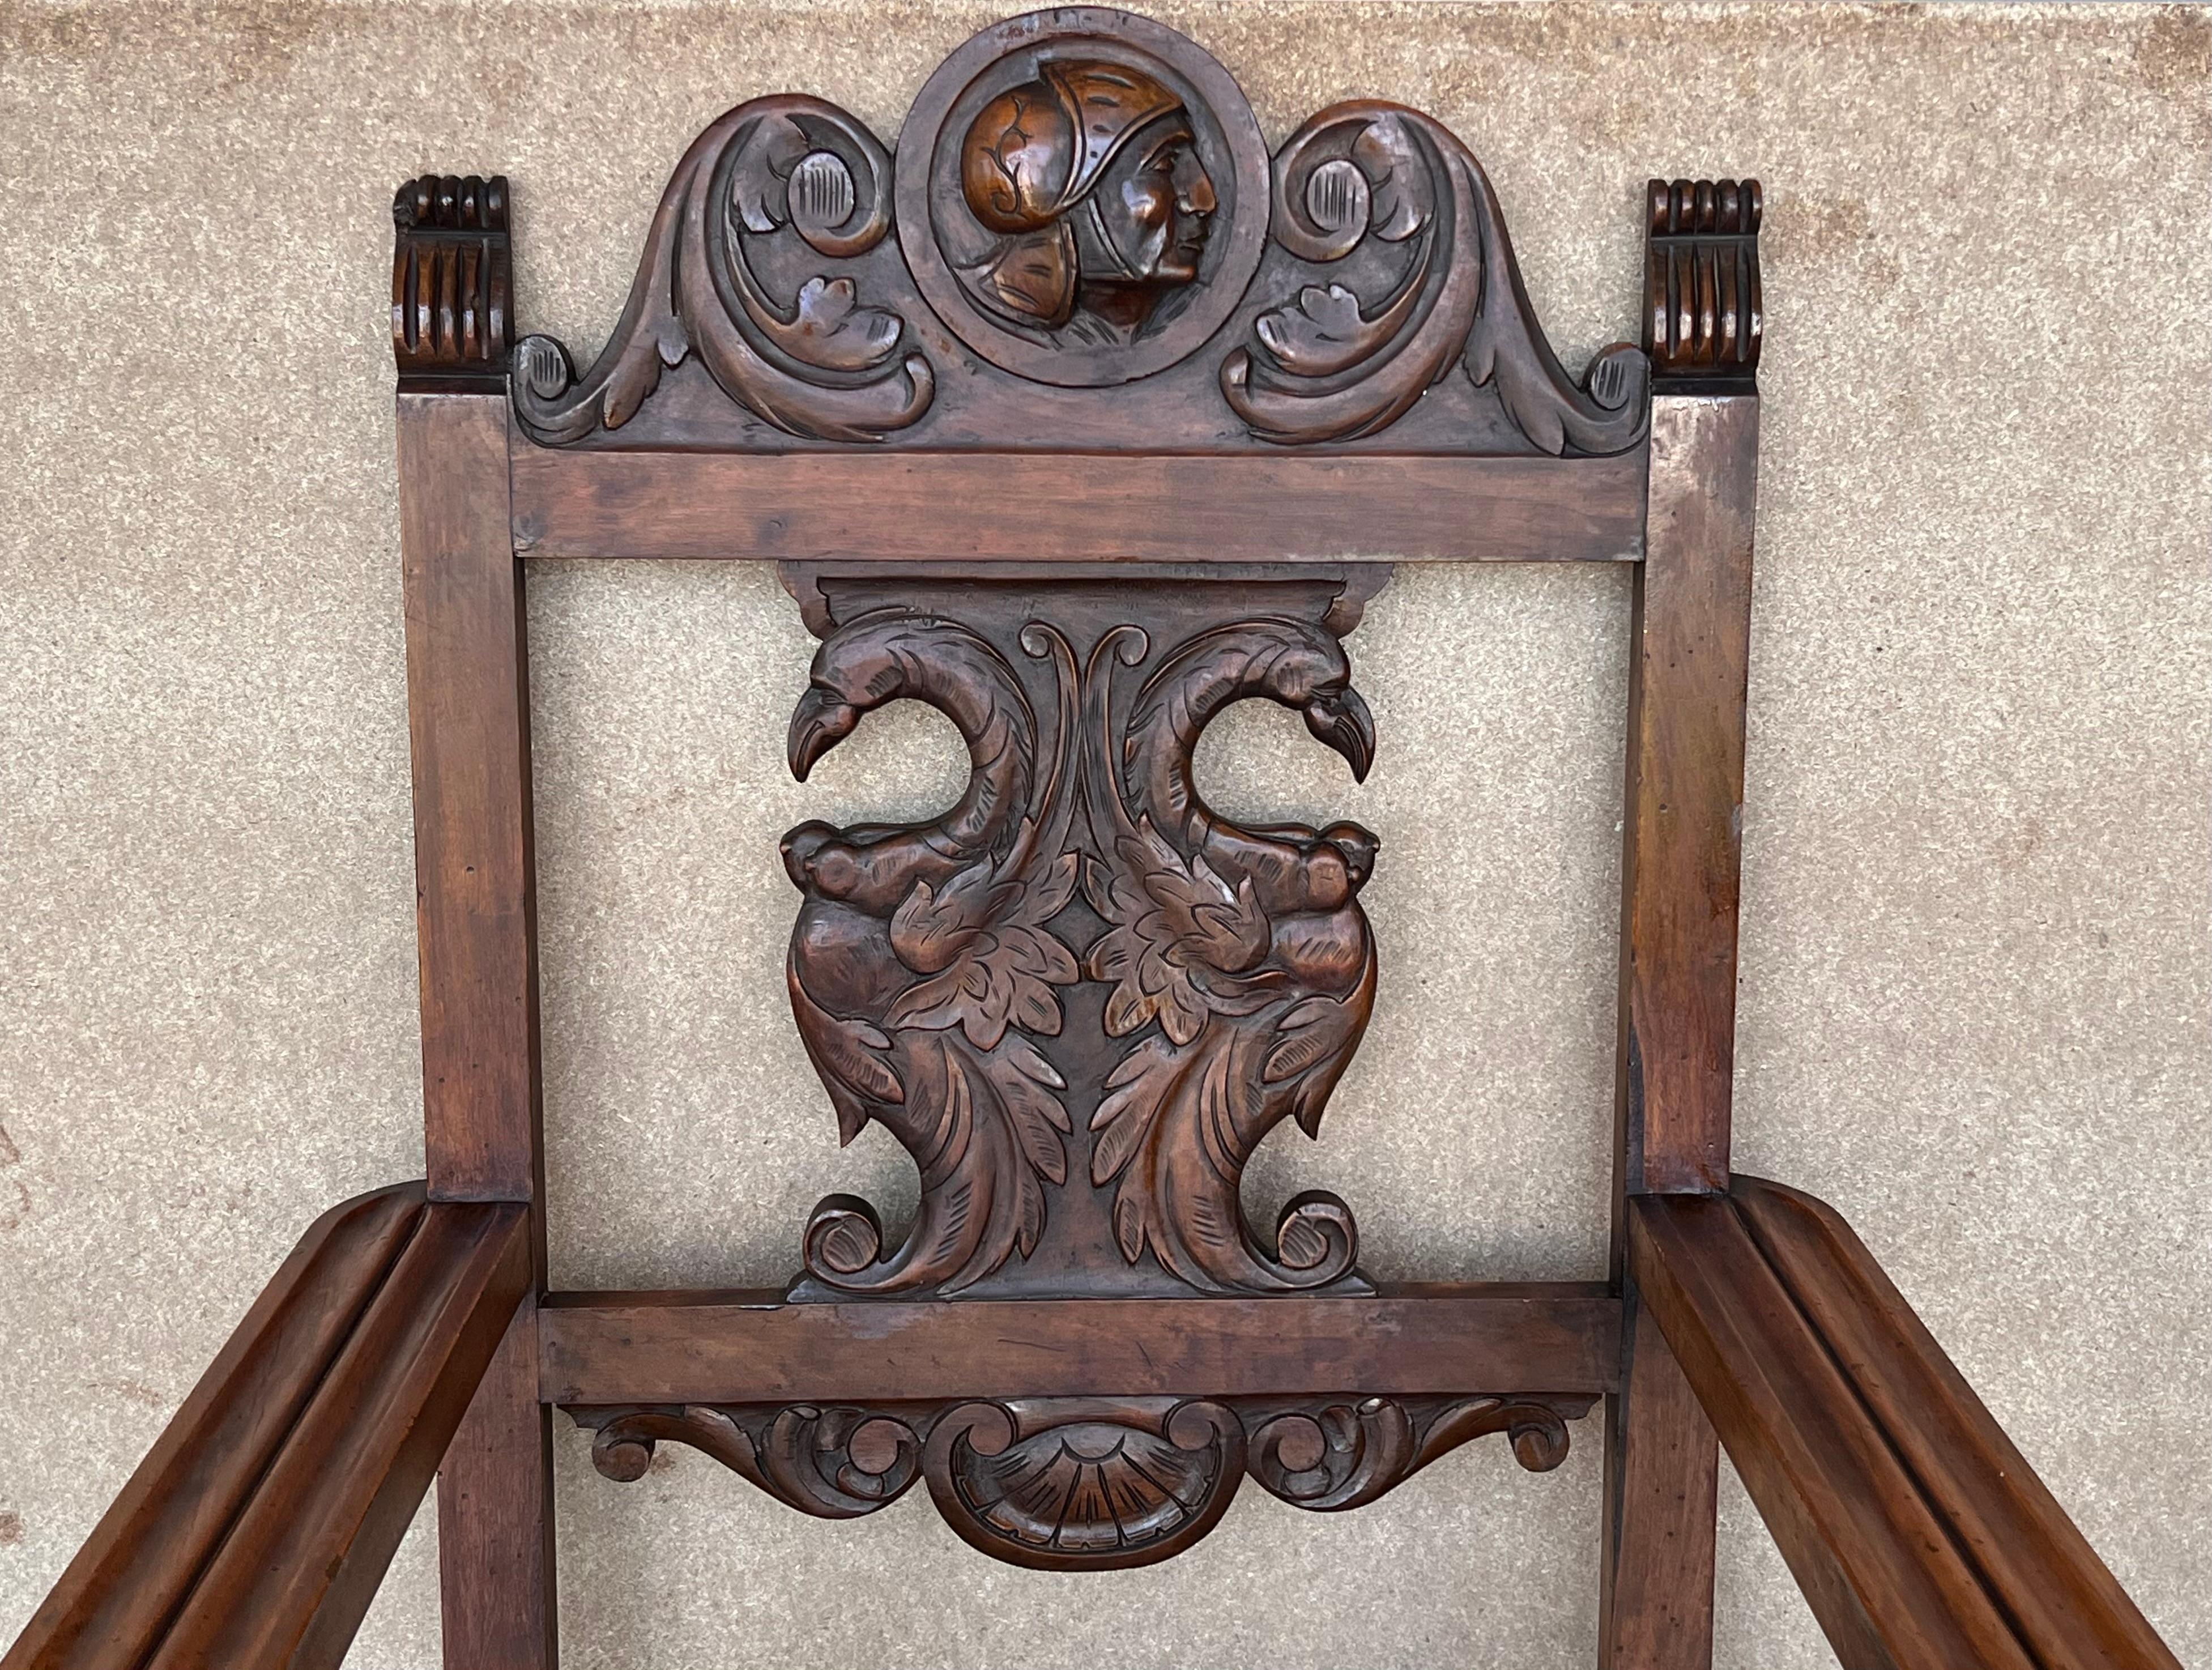 19th Century French Carved Walnut Turned Wood Armchair with Claw Feet In Good Condition For Sale In Miami, FL